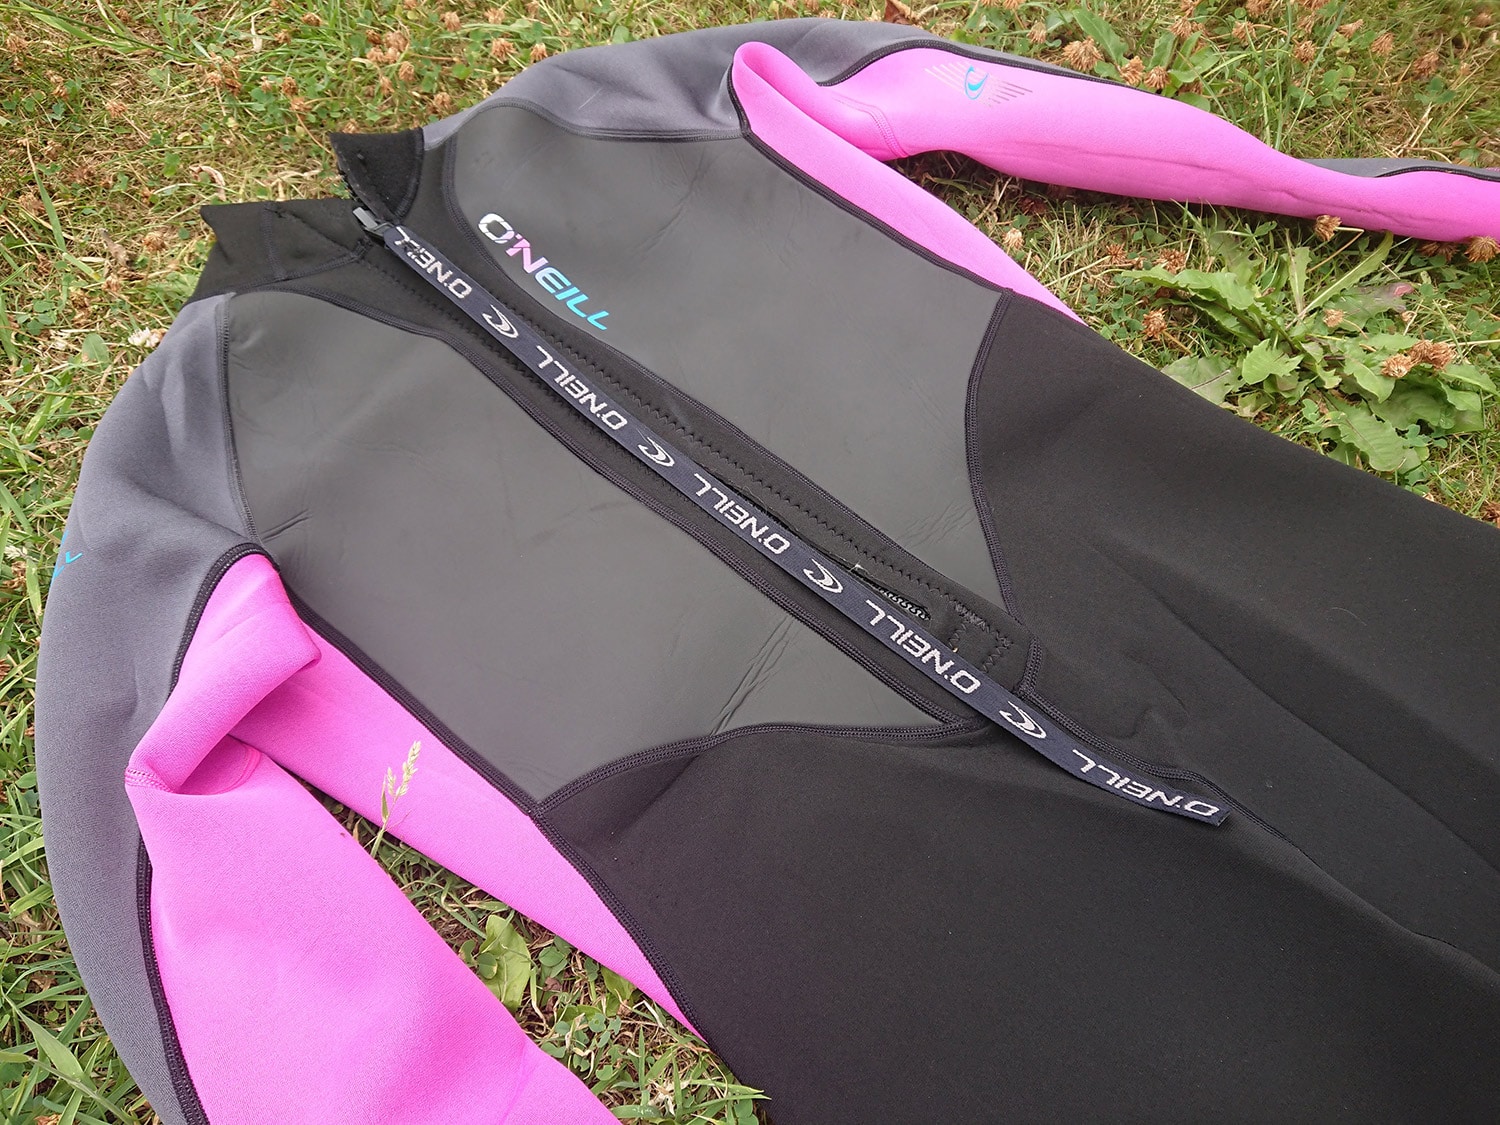 Ladies O'Neill Reactor Wet Suit Review